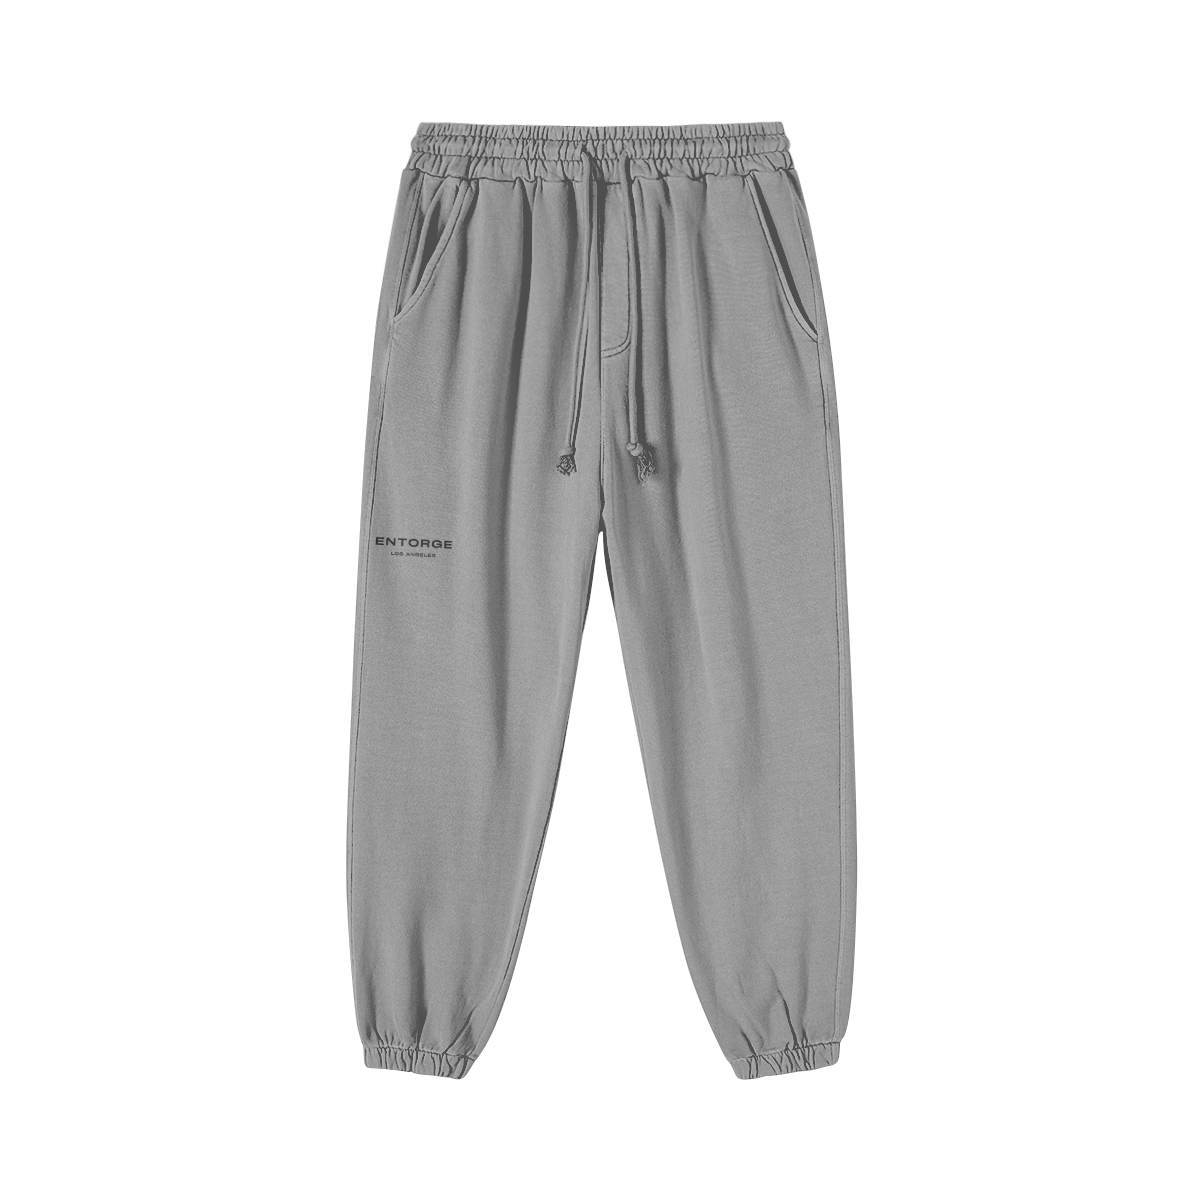 HEAVY WASHED BAGGY JOGGER